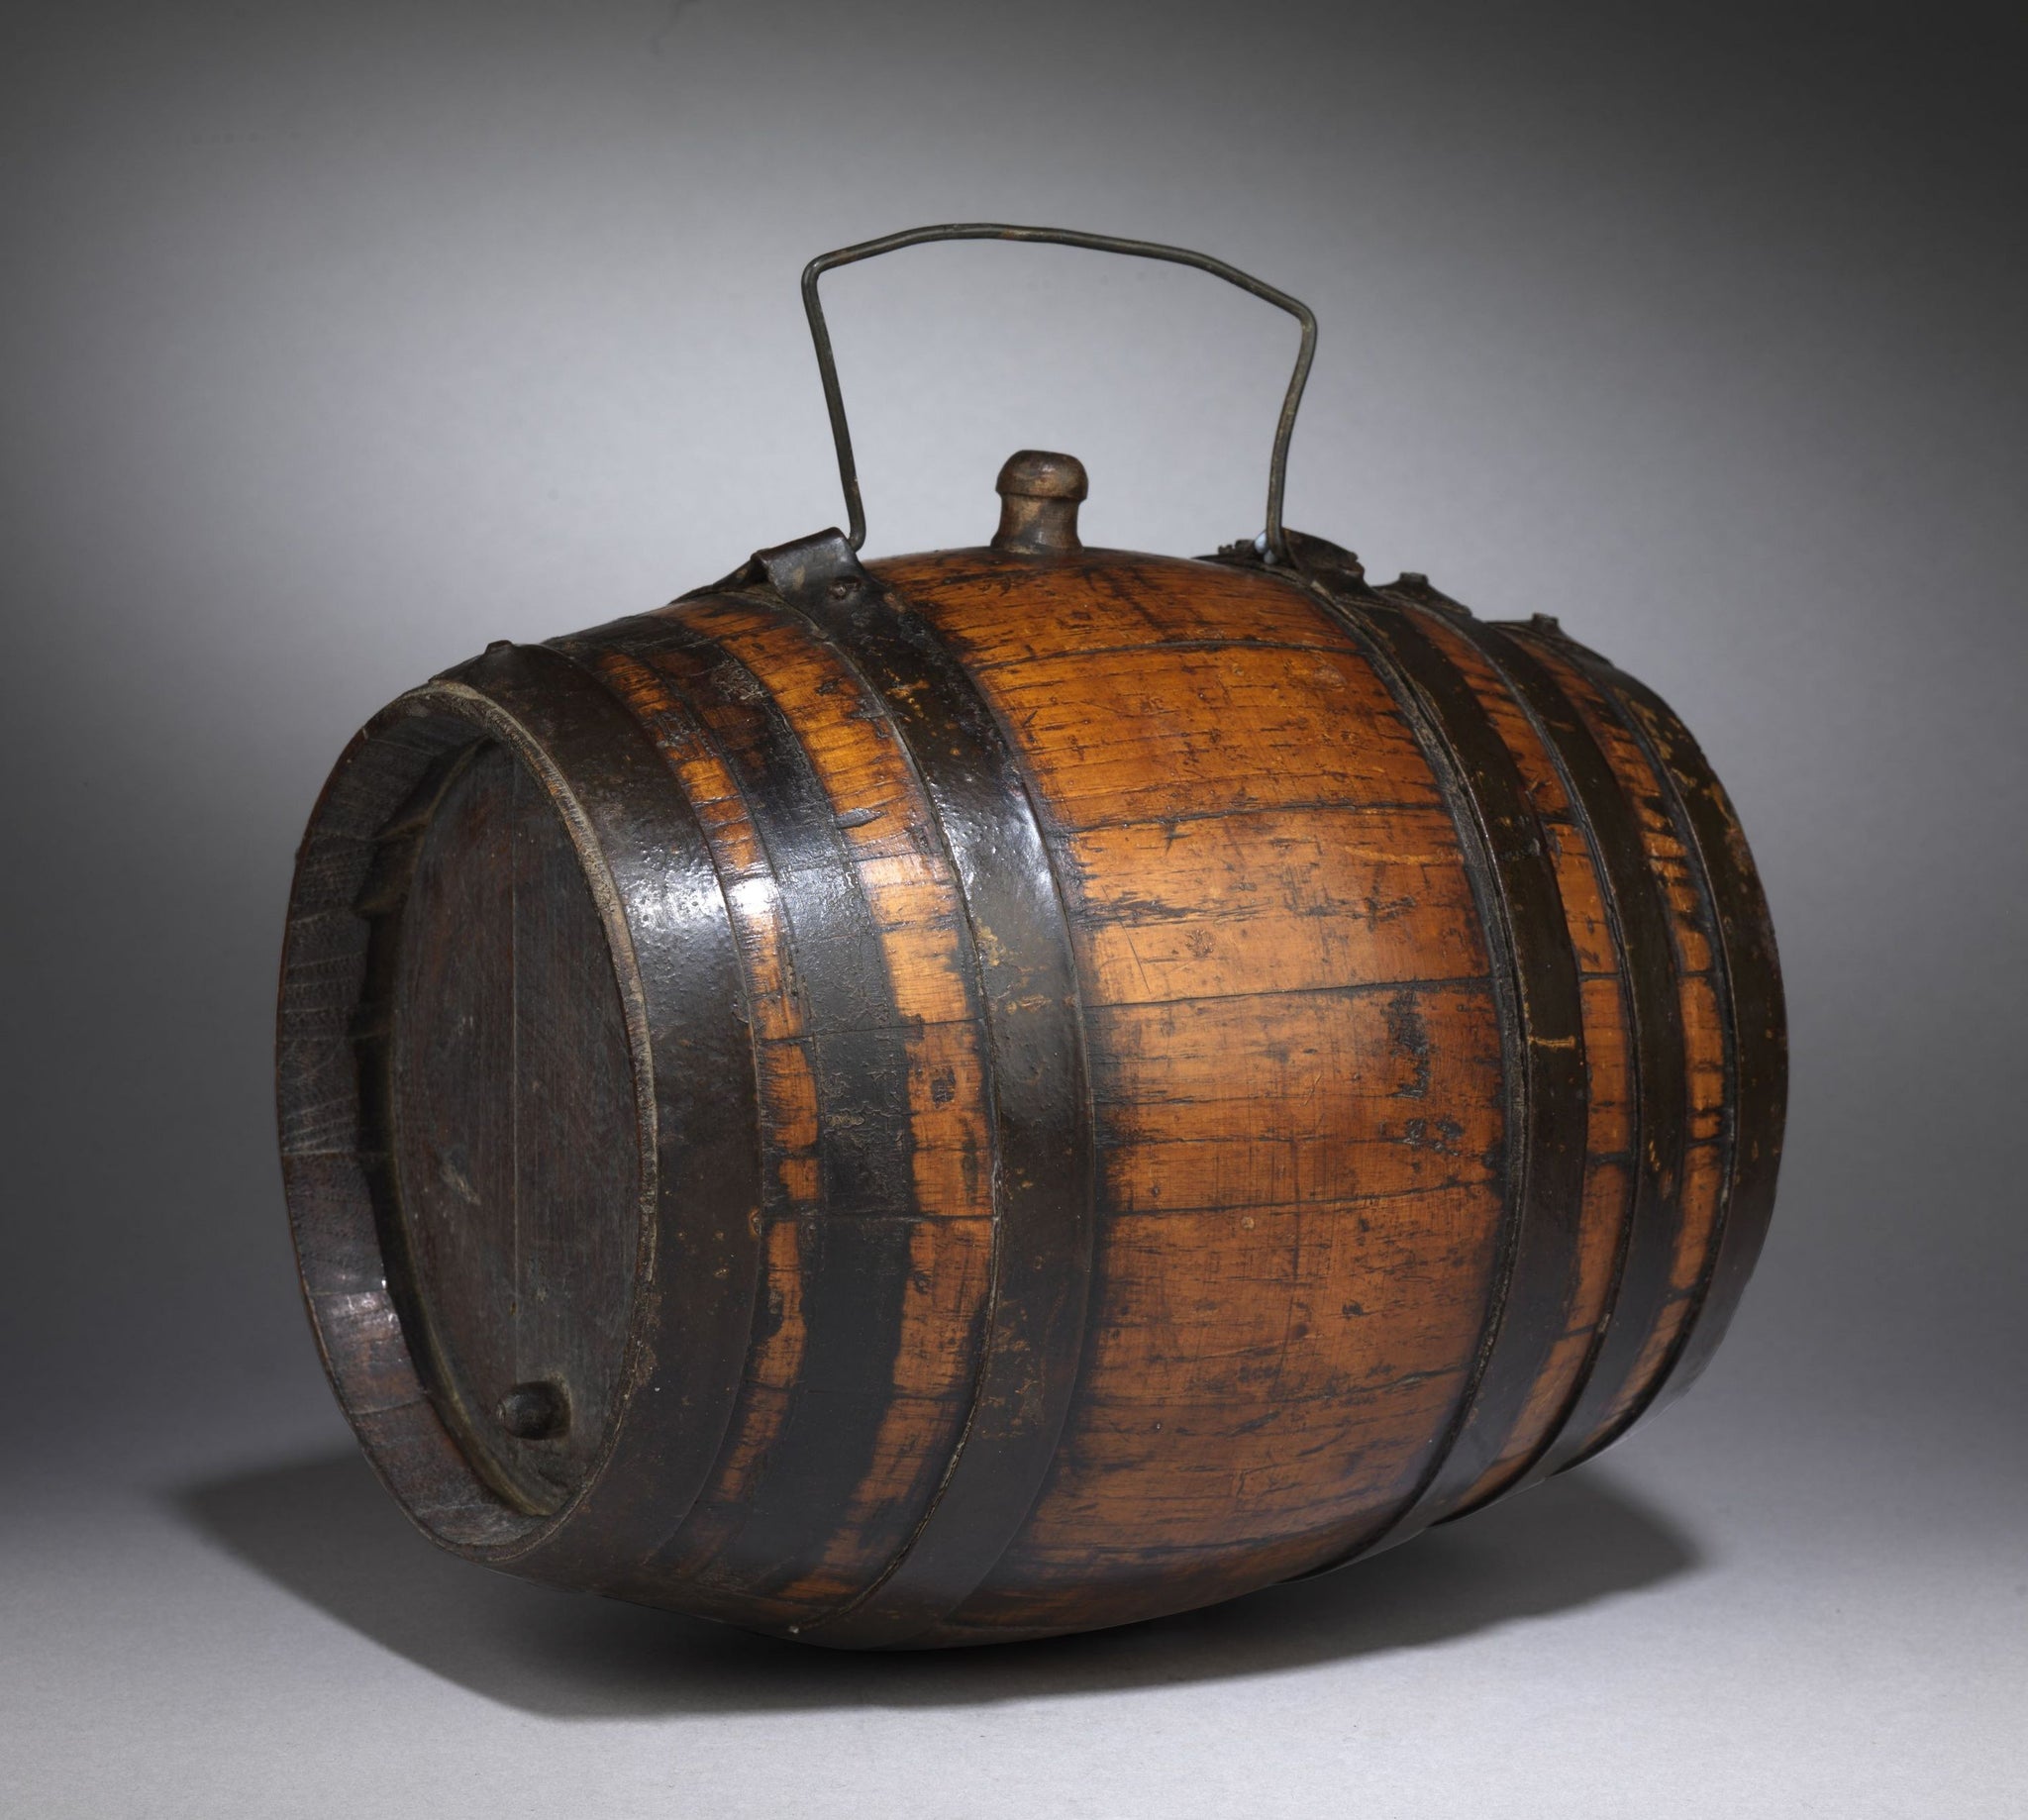 Early Coopered "Costrell" or Cider Barrel